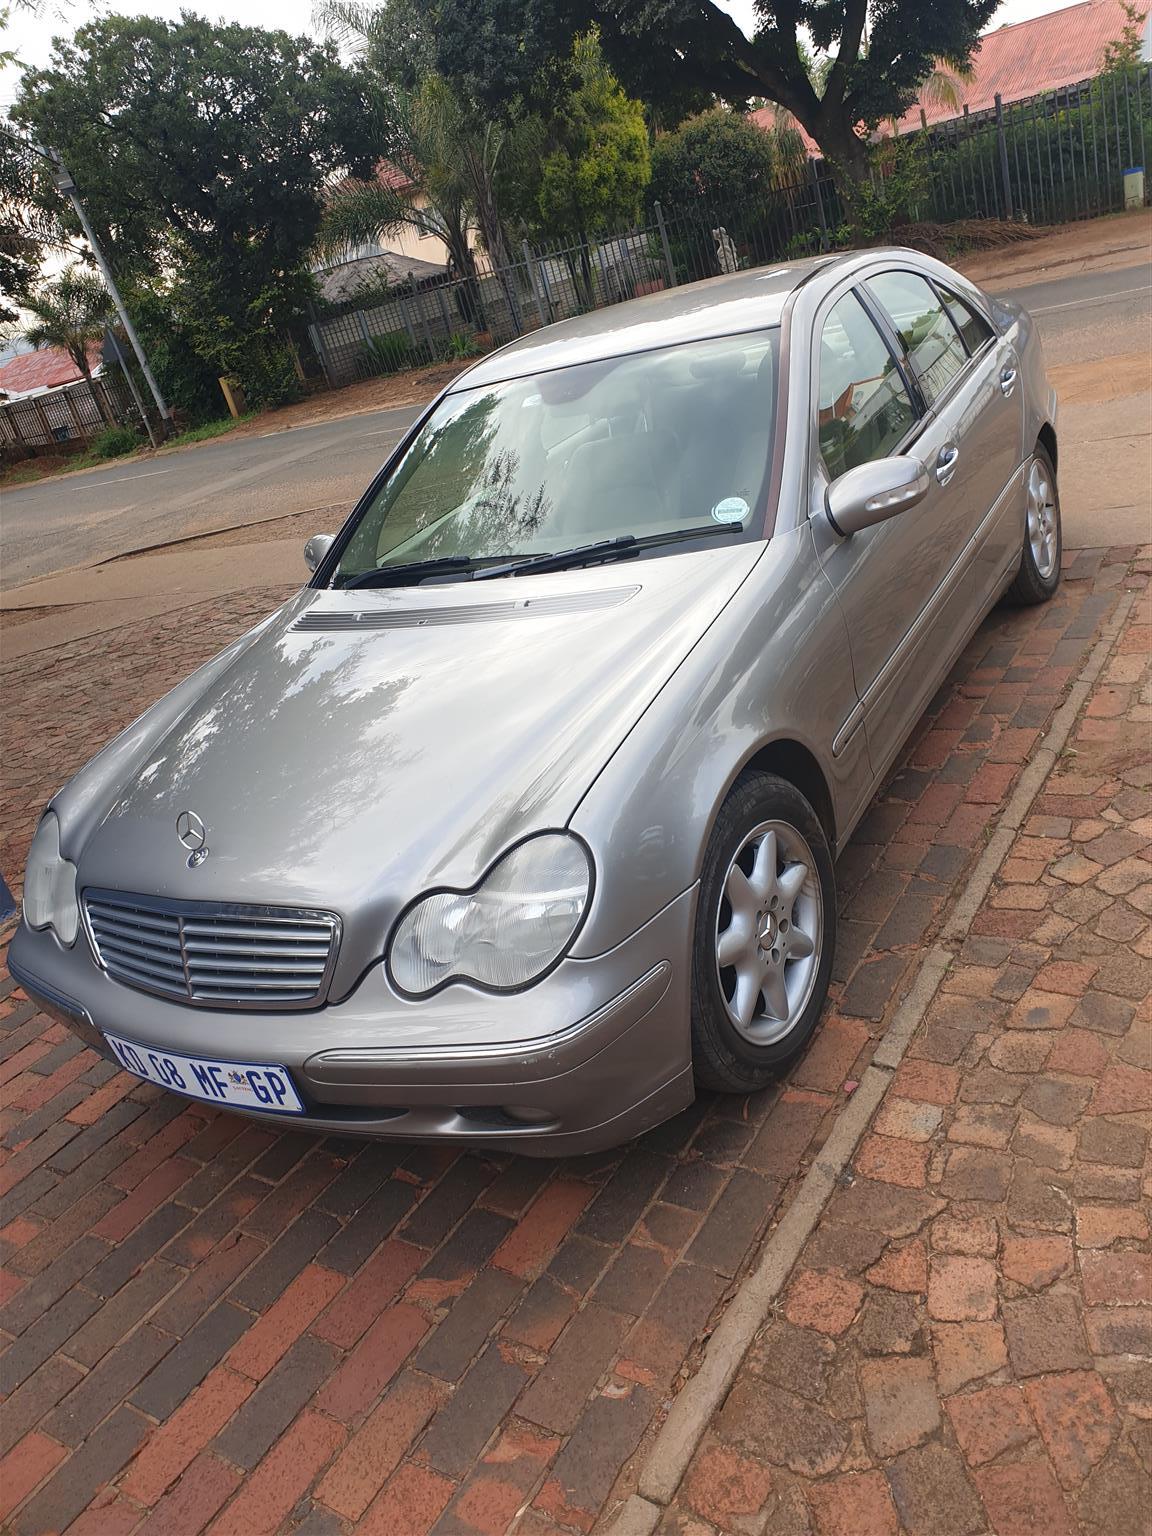 2001 MECEDES-BENZ 270 CDI OUT. DRIVE DAYLY. GOOD COND. SERVICE HIST.